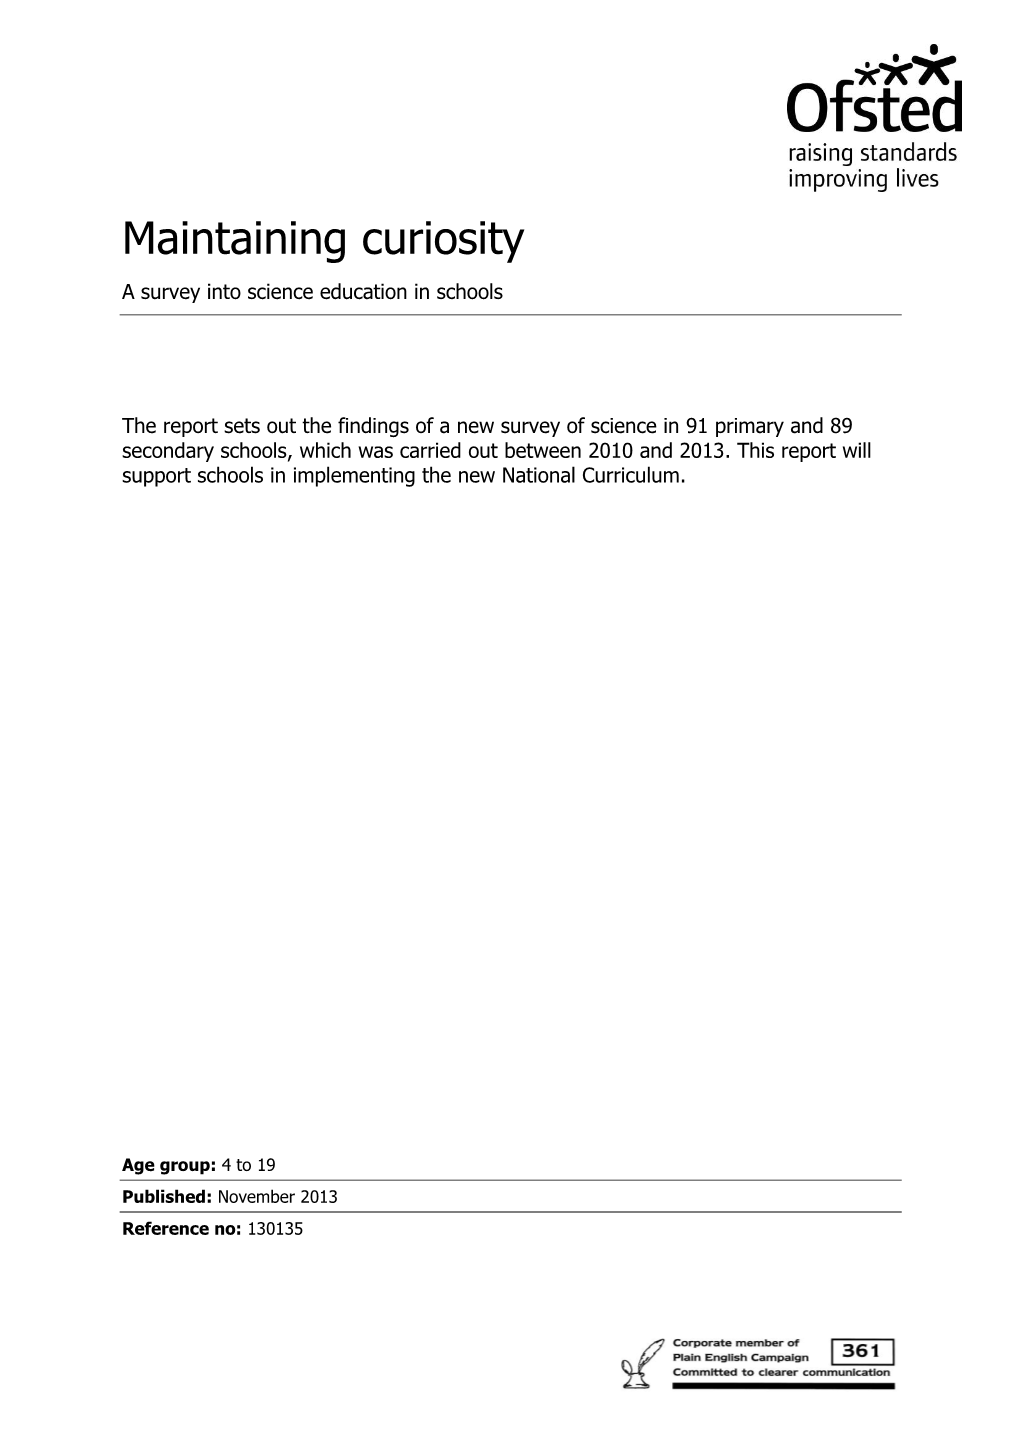 Maintaining Curiosity a Survey Into Science Education in Schools